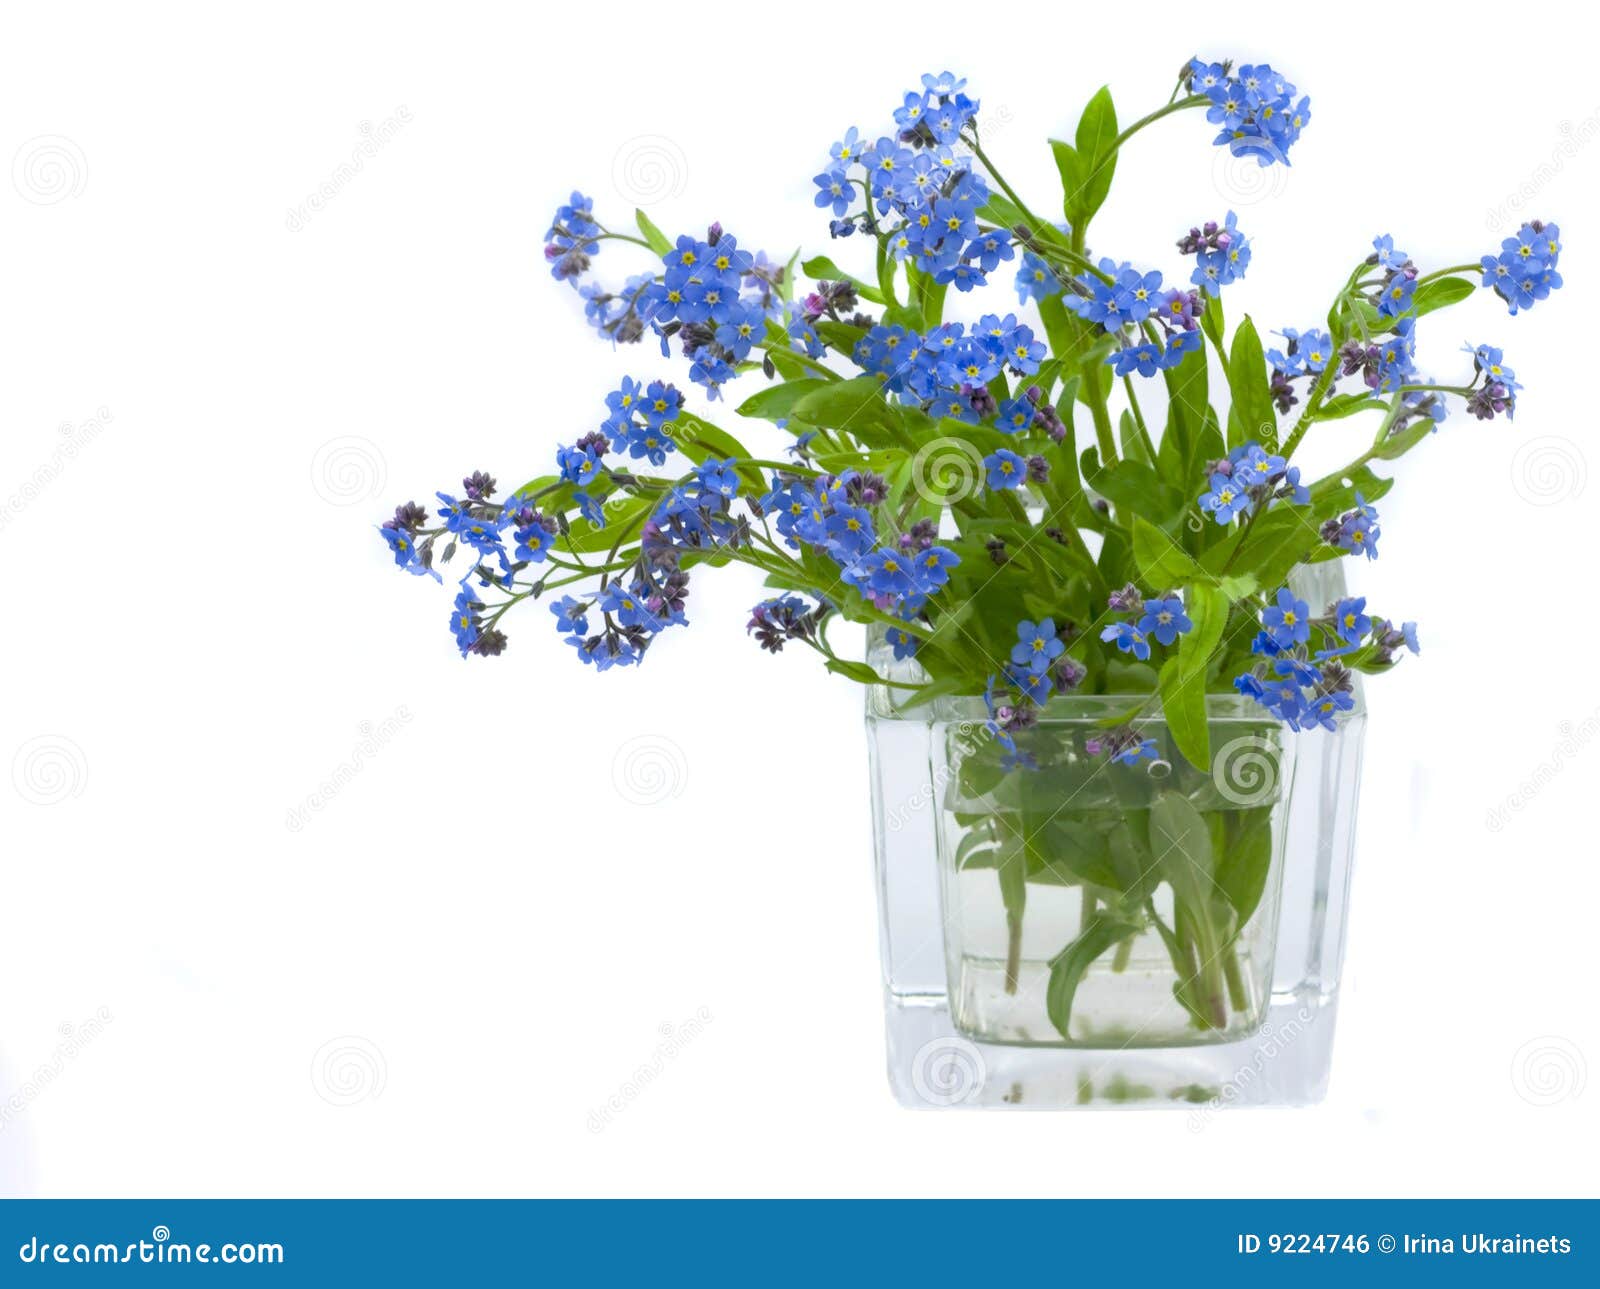 free clip art forget me not - photo #32